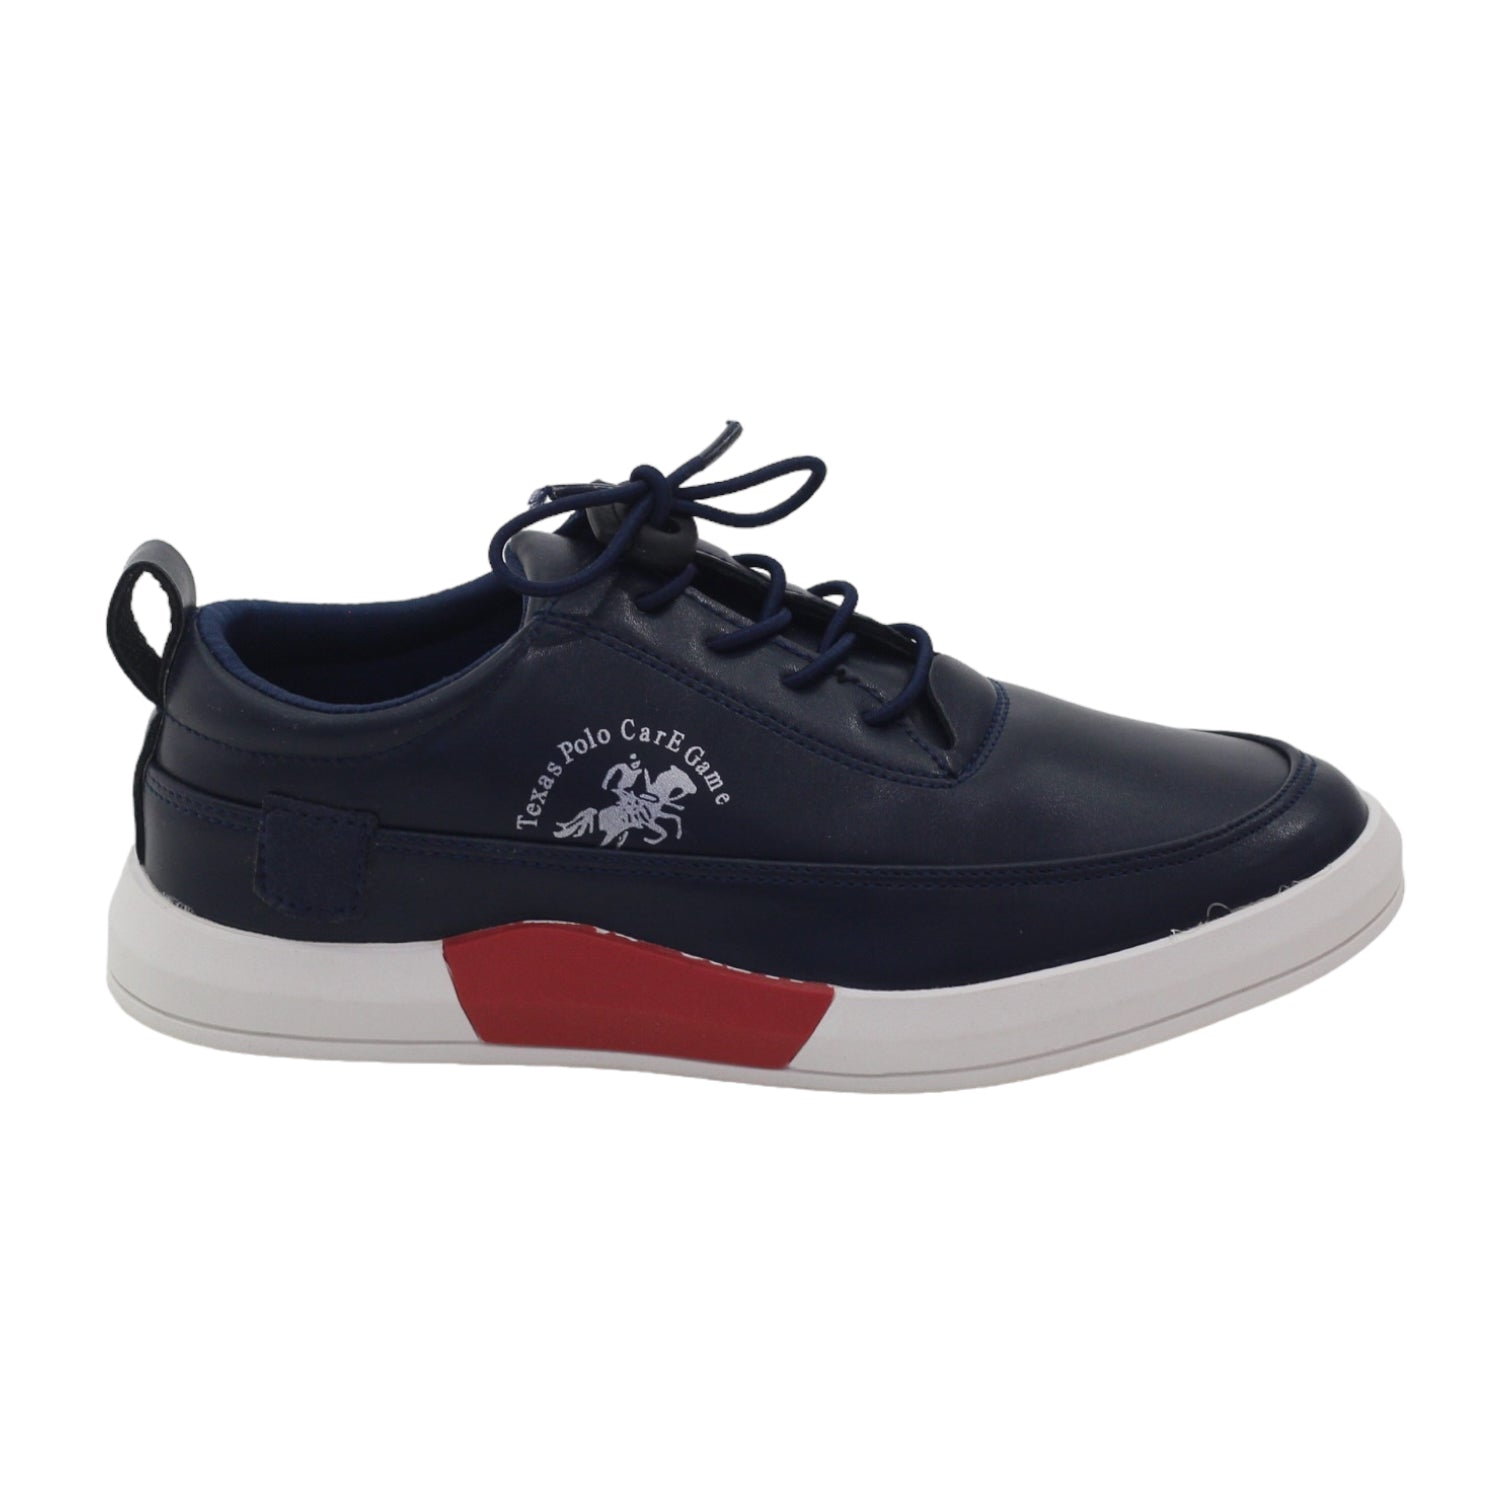 Oliver boys lace up B-19 sneaker navy